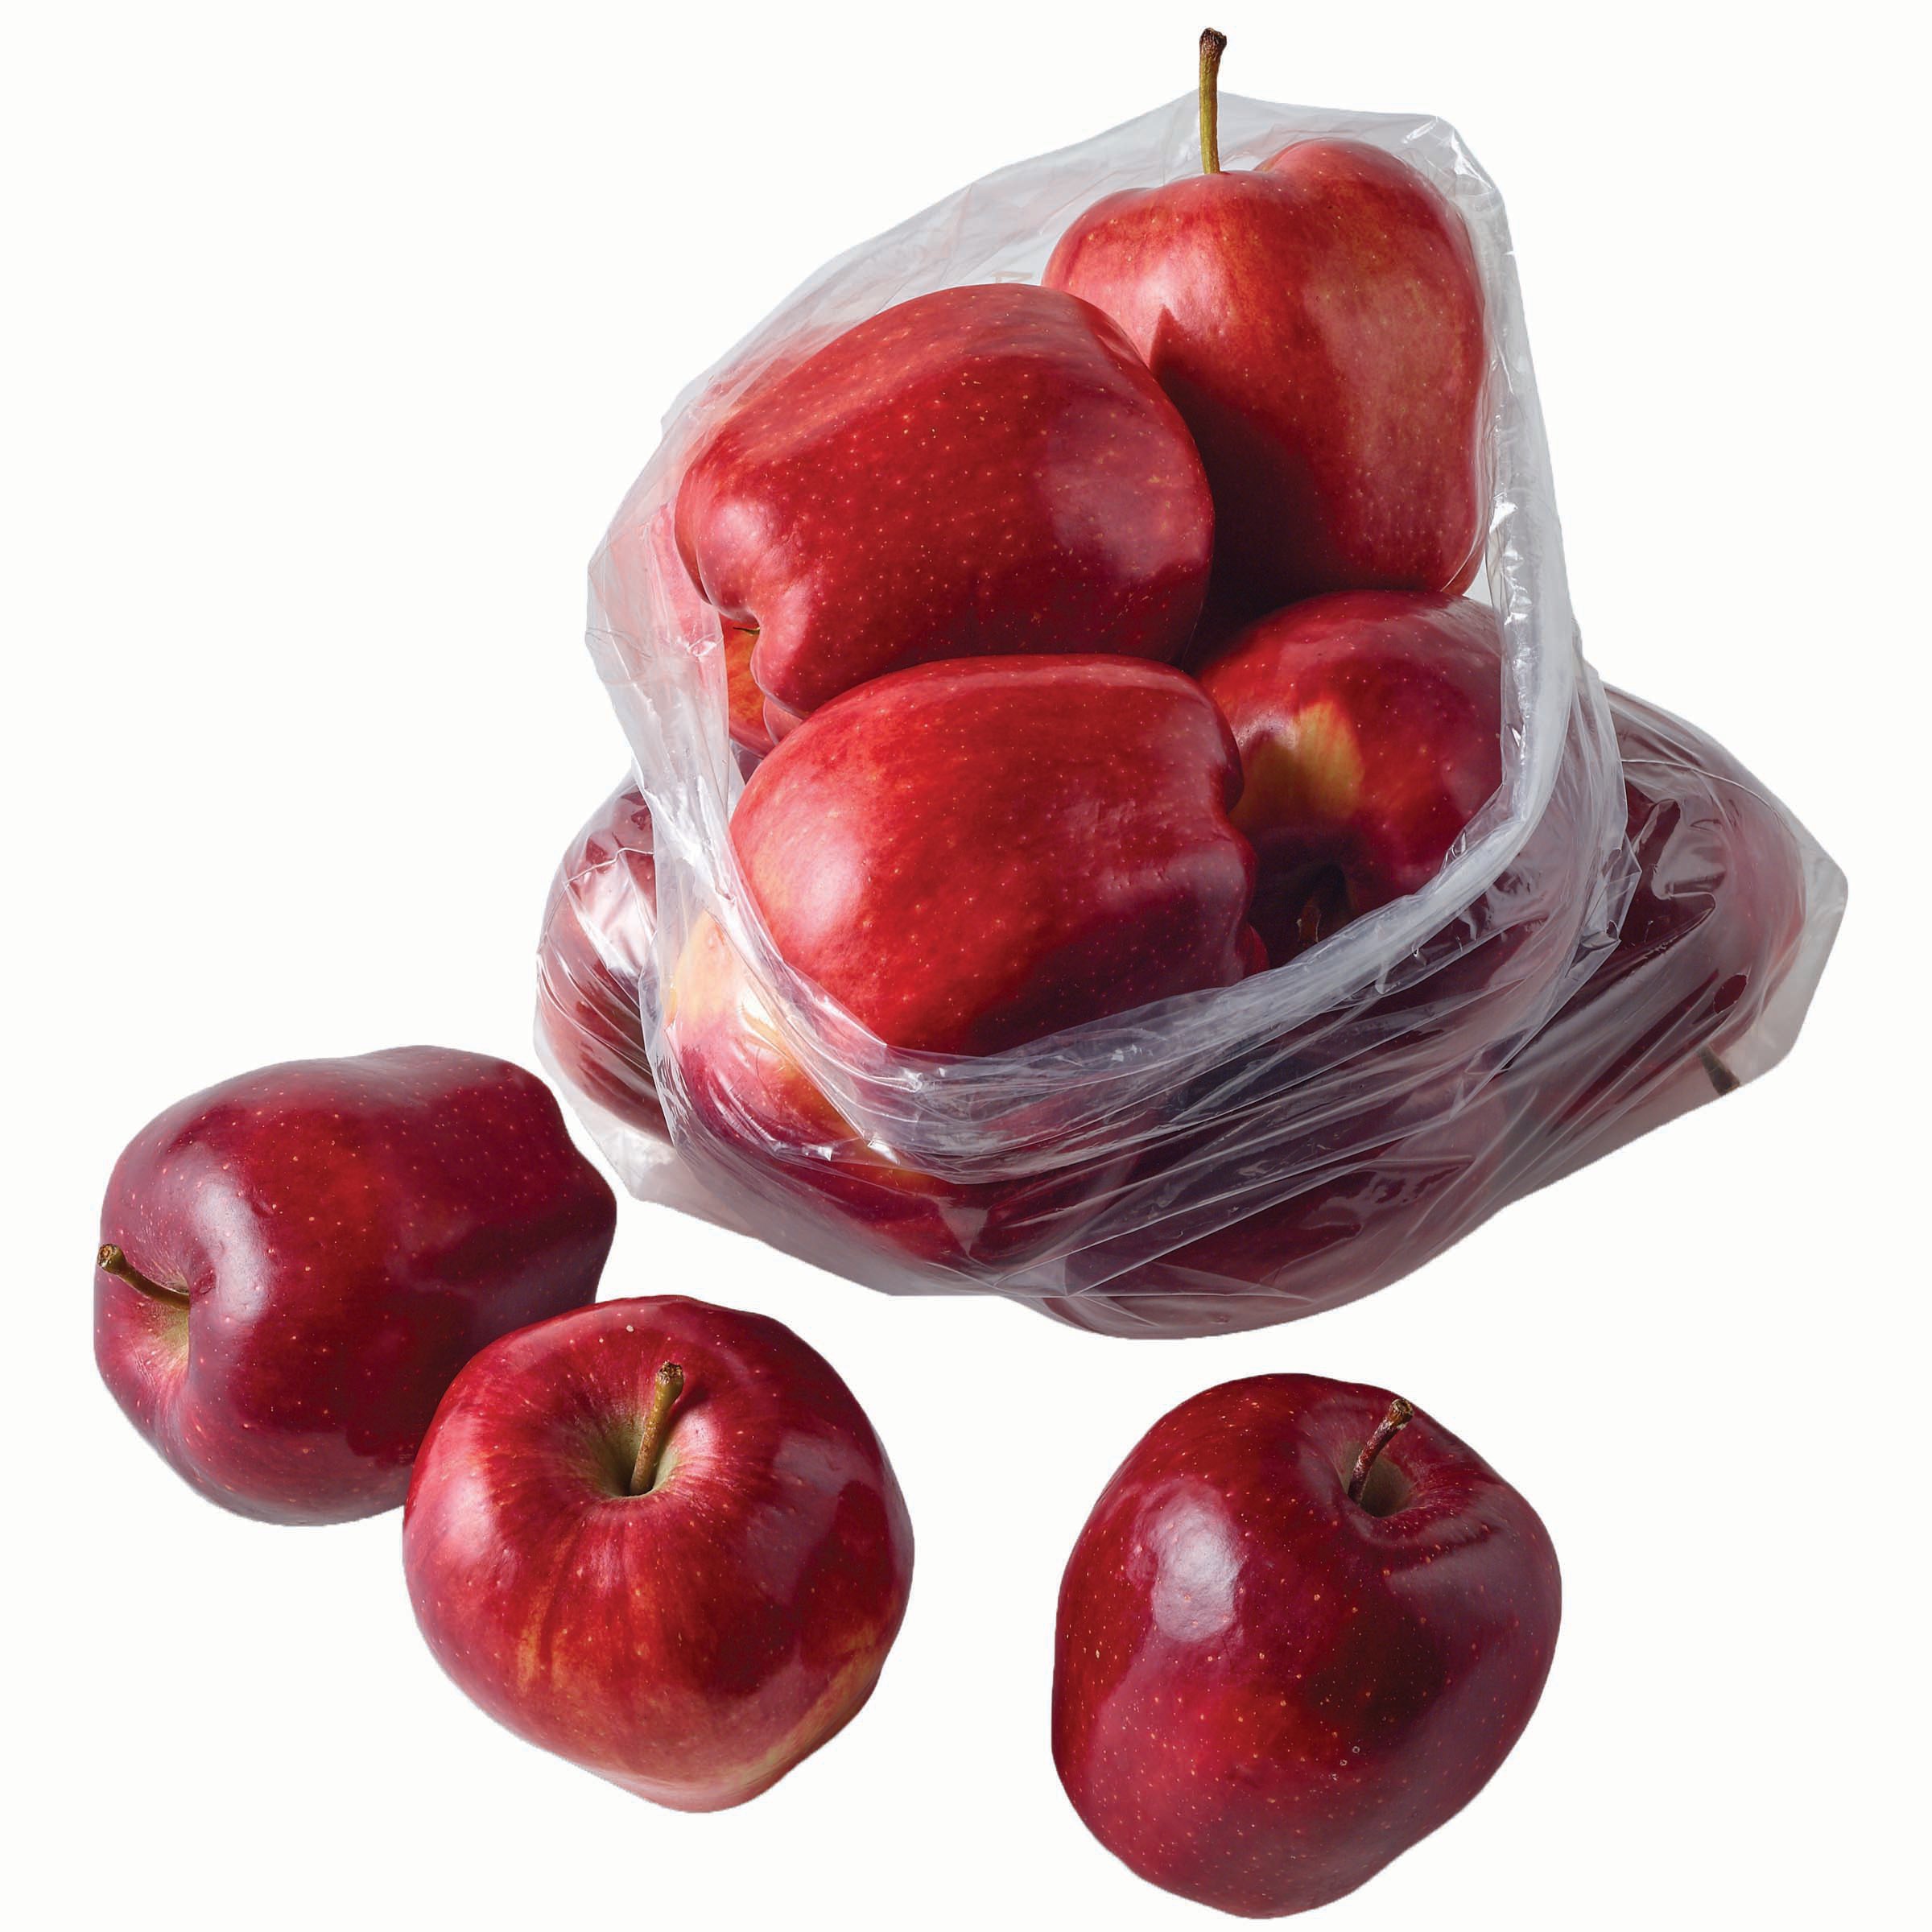 Save on Apples Red Delicious Order Online Delivery